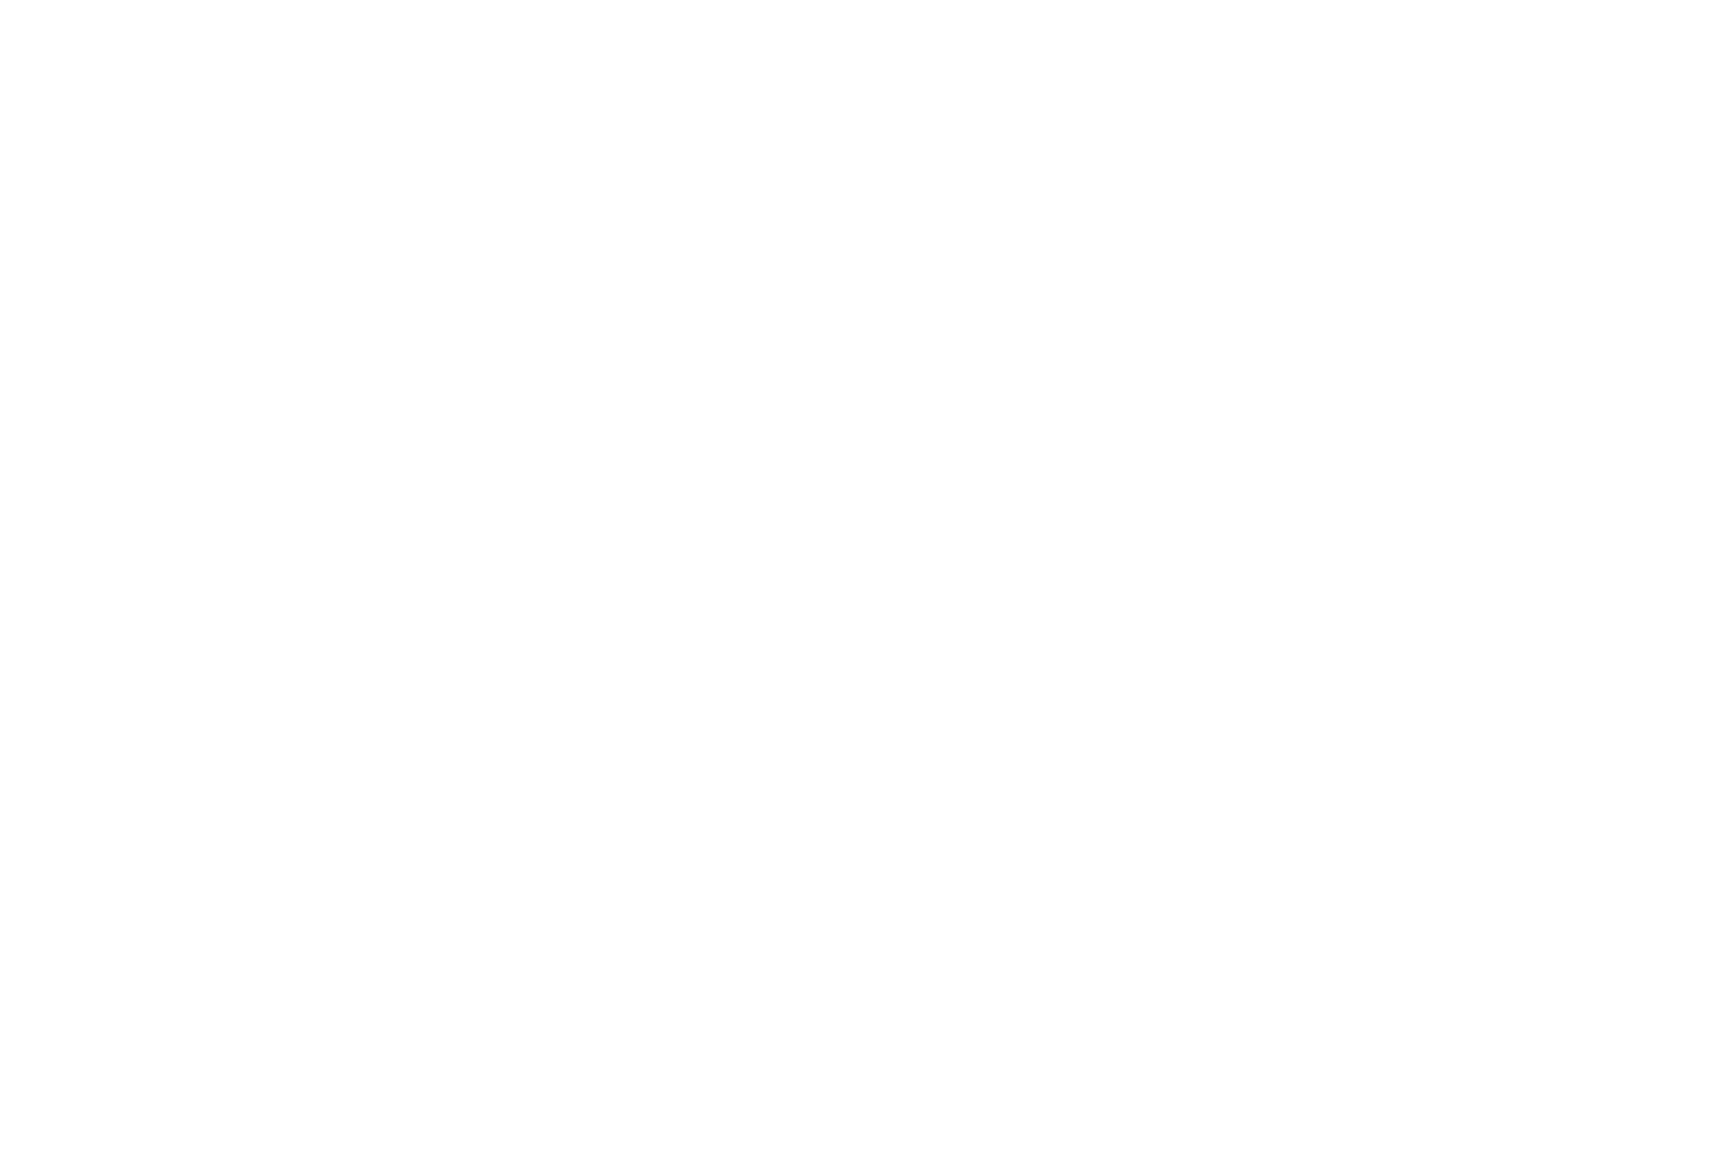 OFFICIAL SELECTION - Sydney Underground Film Festival - 2021 (1) copy.png